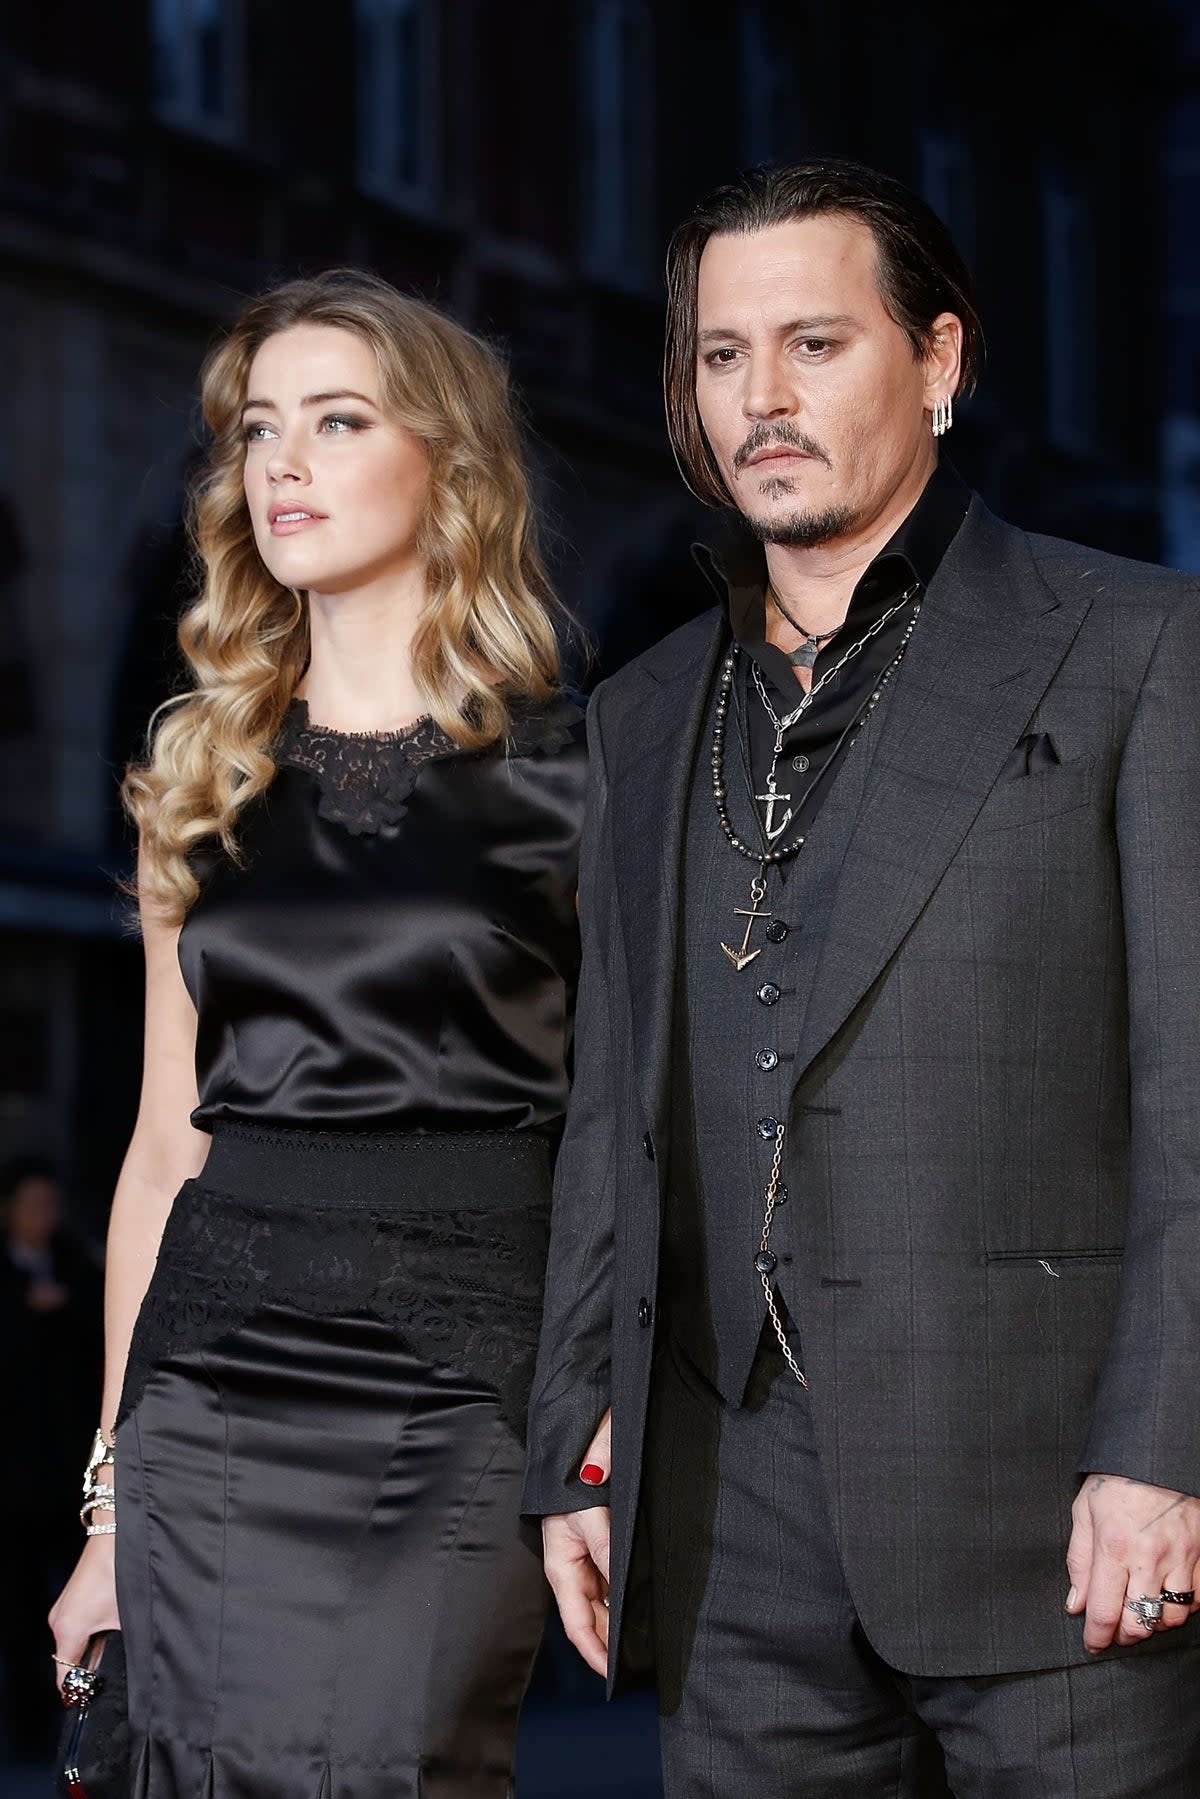 Heard and Depp at a 2015 film premiere, years before their contentious court battles (Getty)